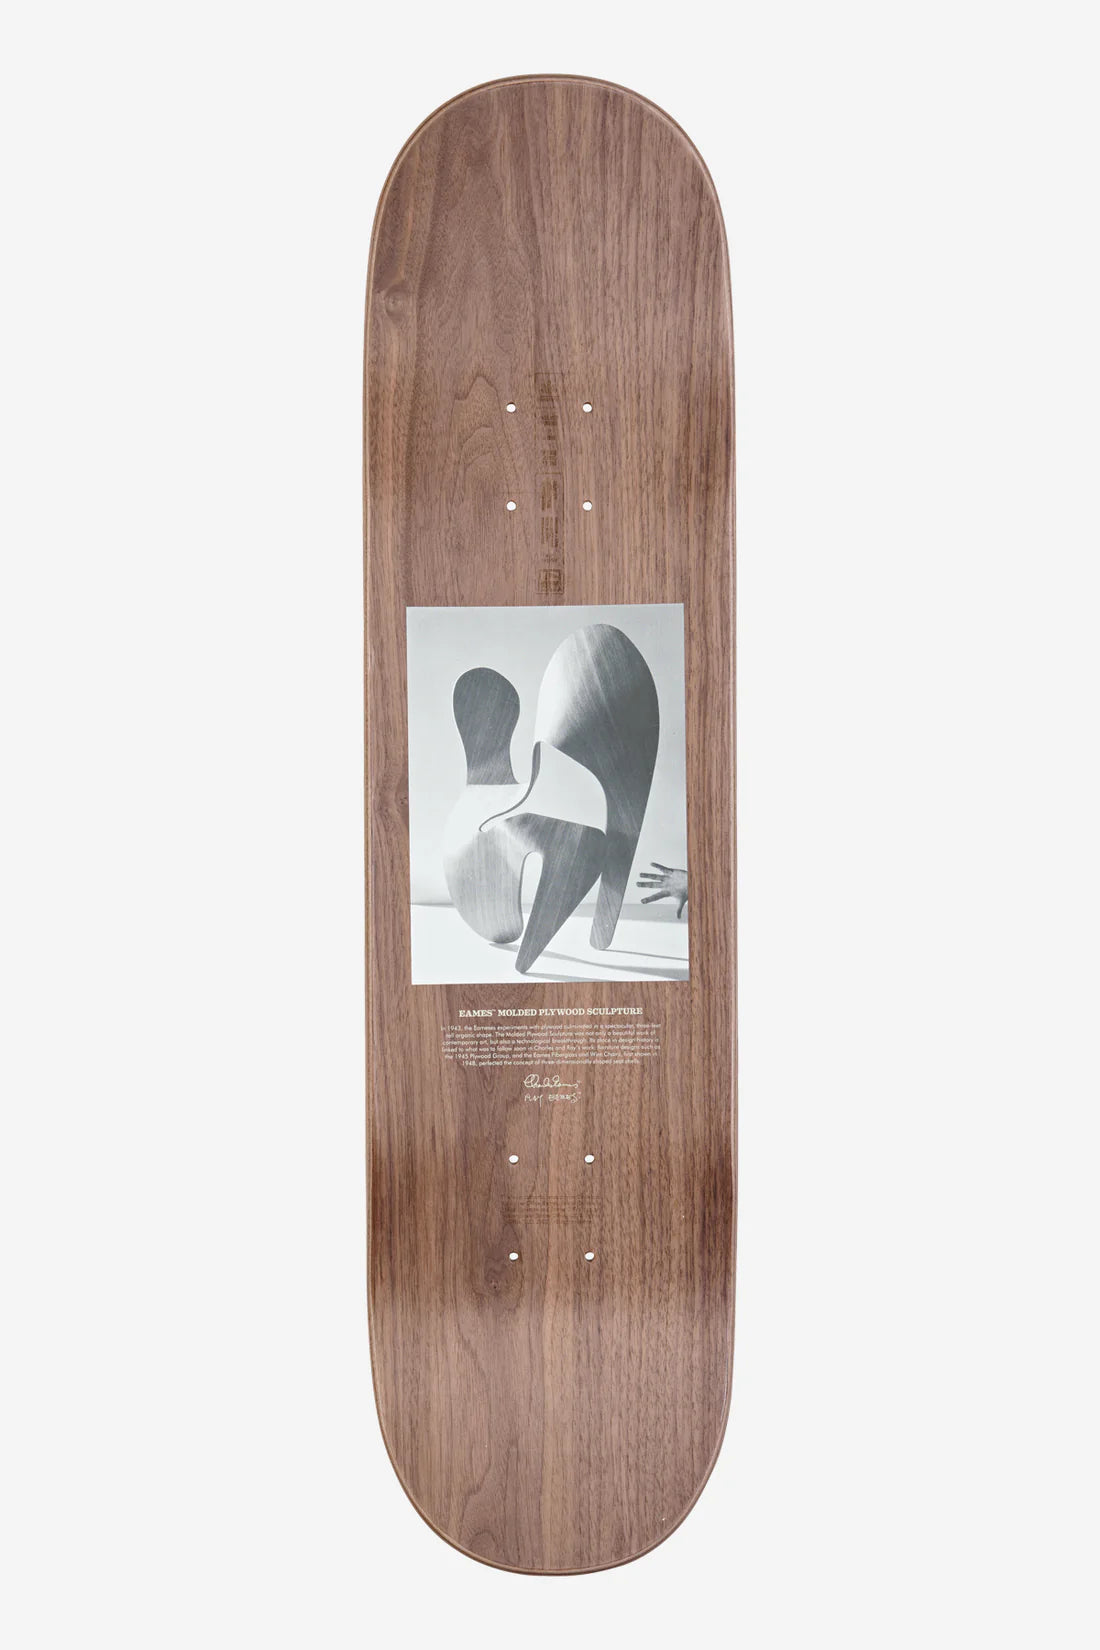 Globe Eames Silhouette Deck Plywood Sculpture 8.0"